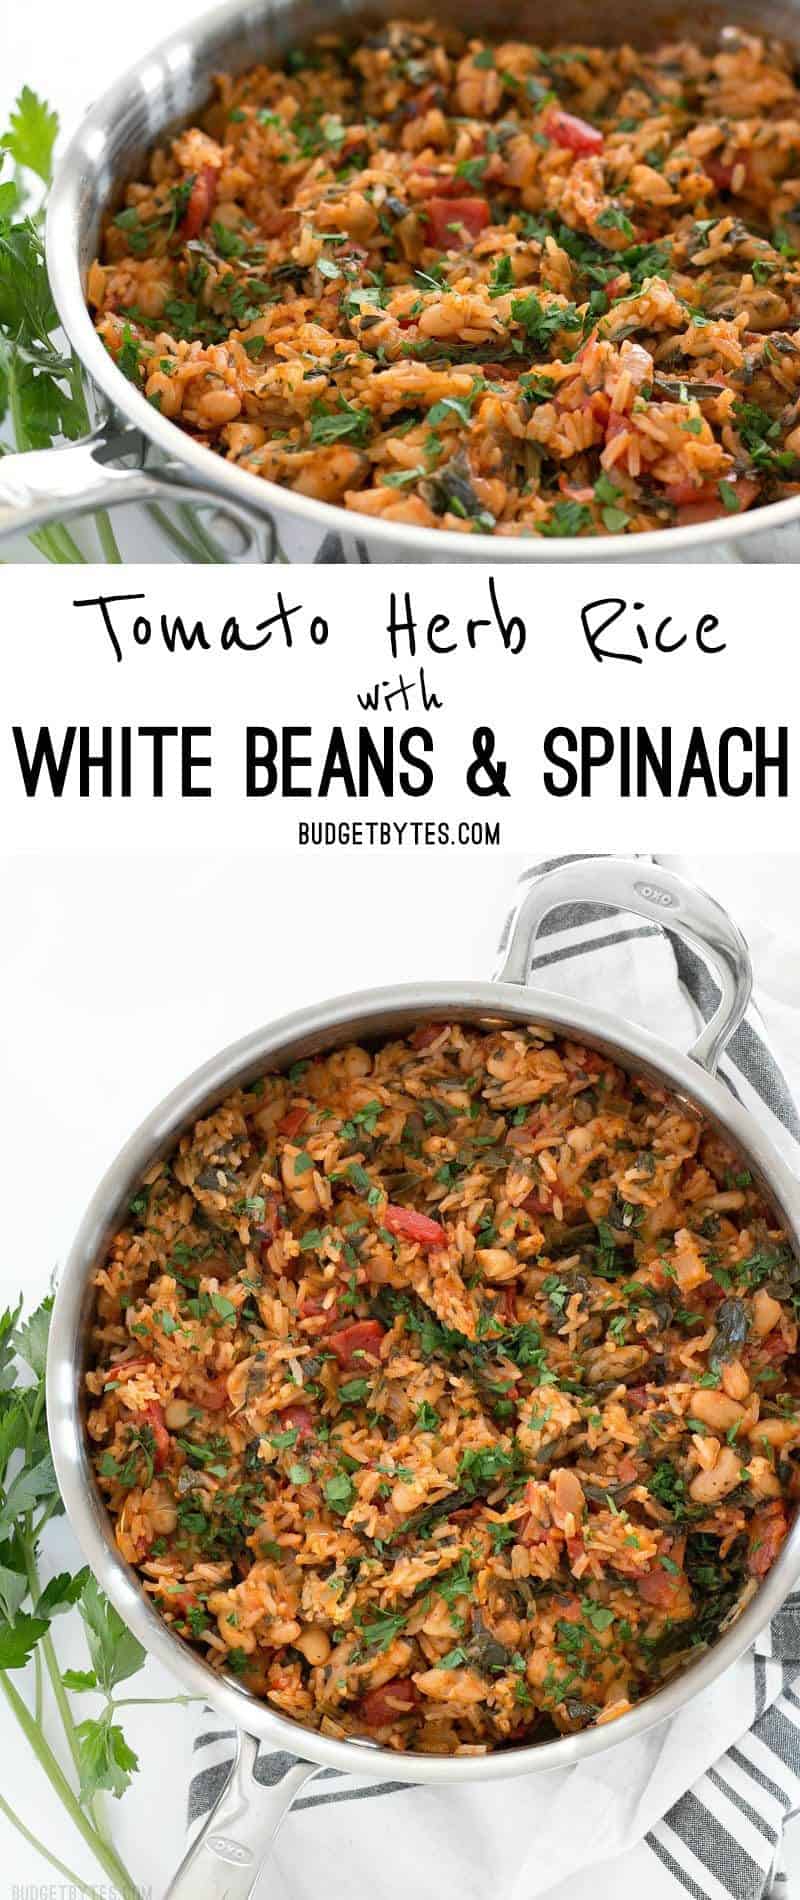 Tomato Herb Rice with White Beans and Spinach is a hearty and flavorful vegan dinner that will be loved by meat eaters and vegetarians alike. BudgetBytes.com